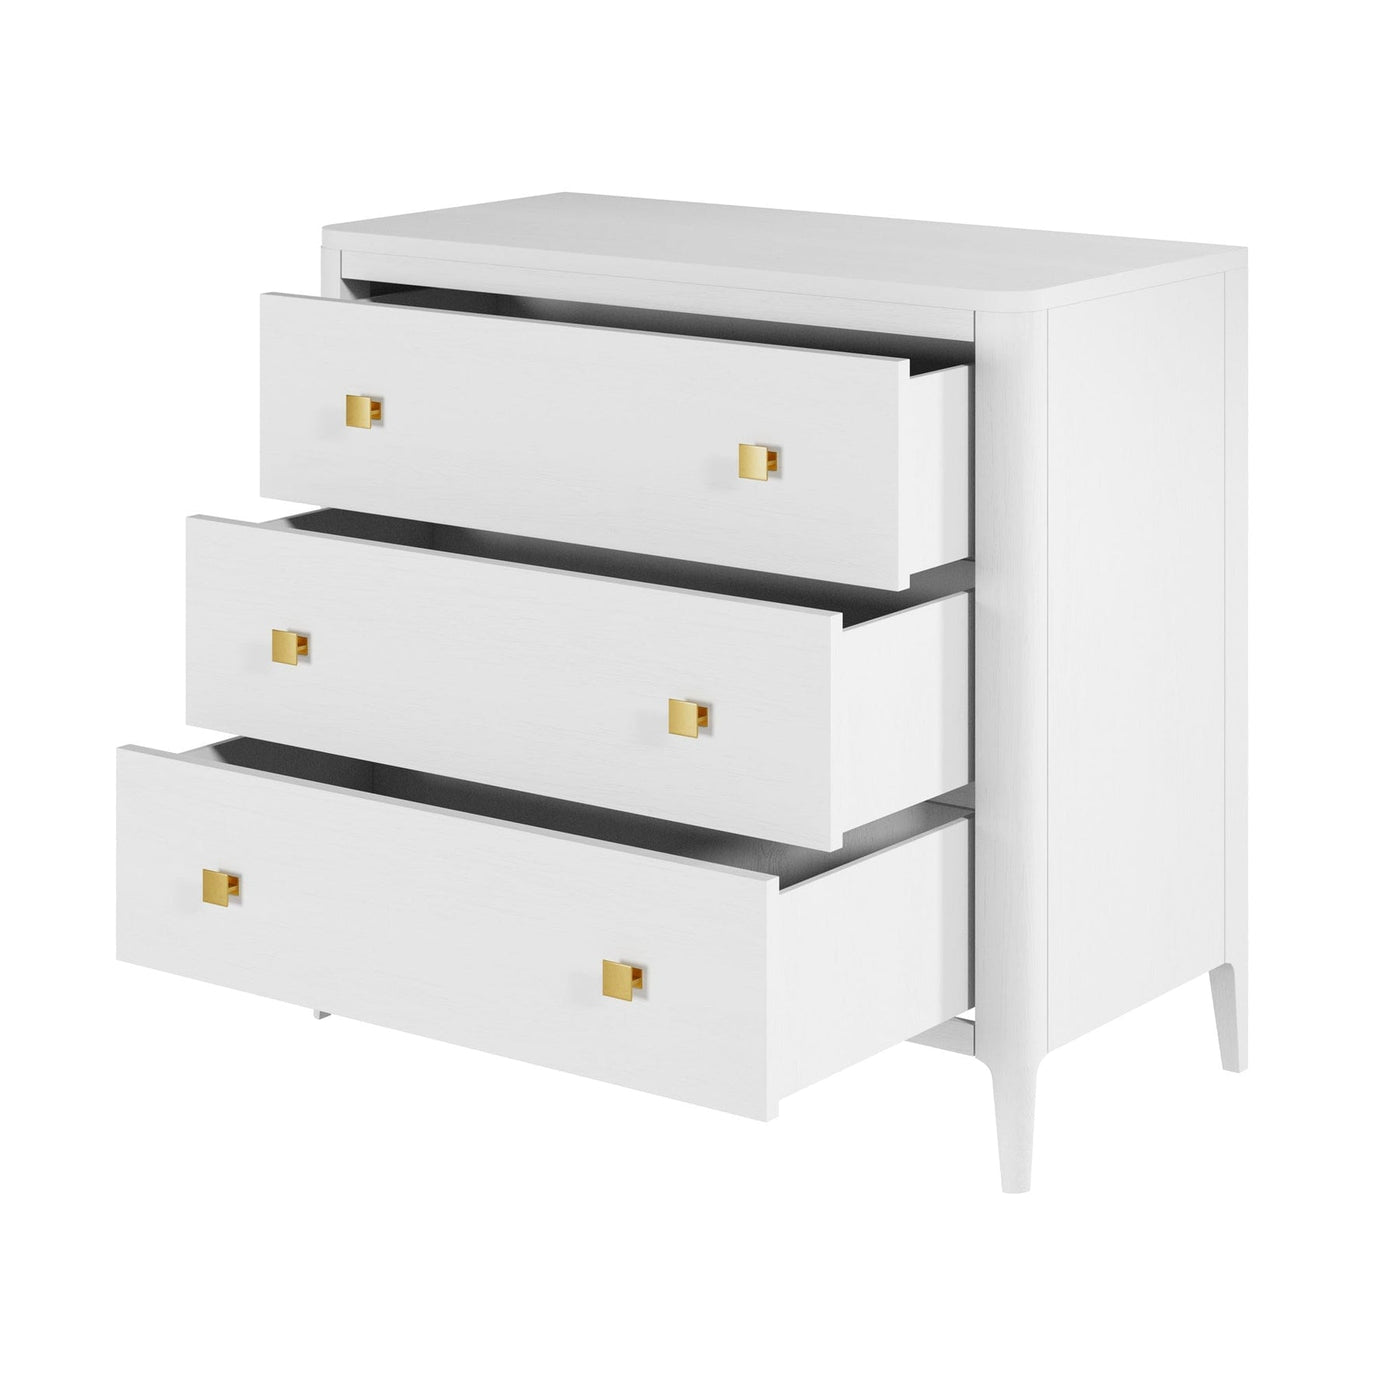 Abberley Chest of Drawers - White by D.I. Designs-Esme Furnishings